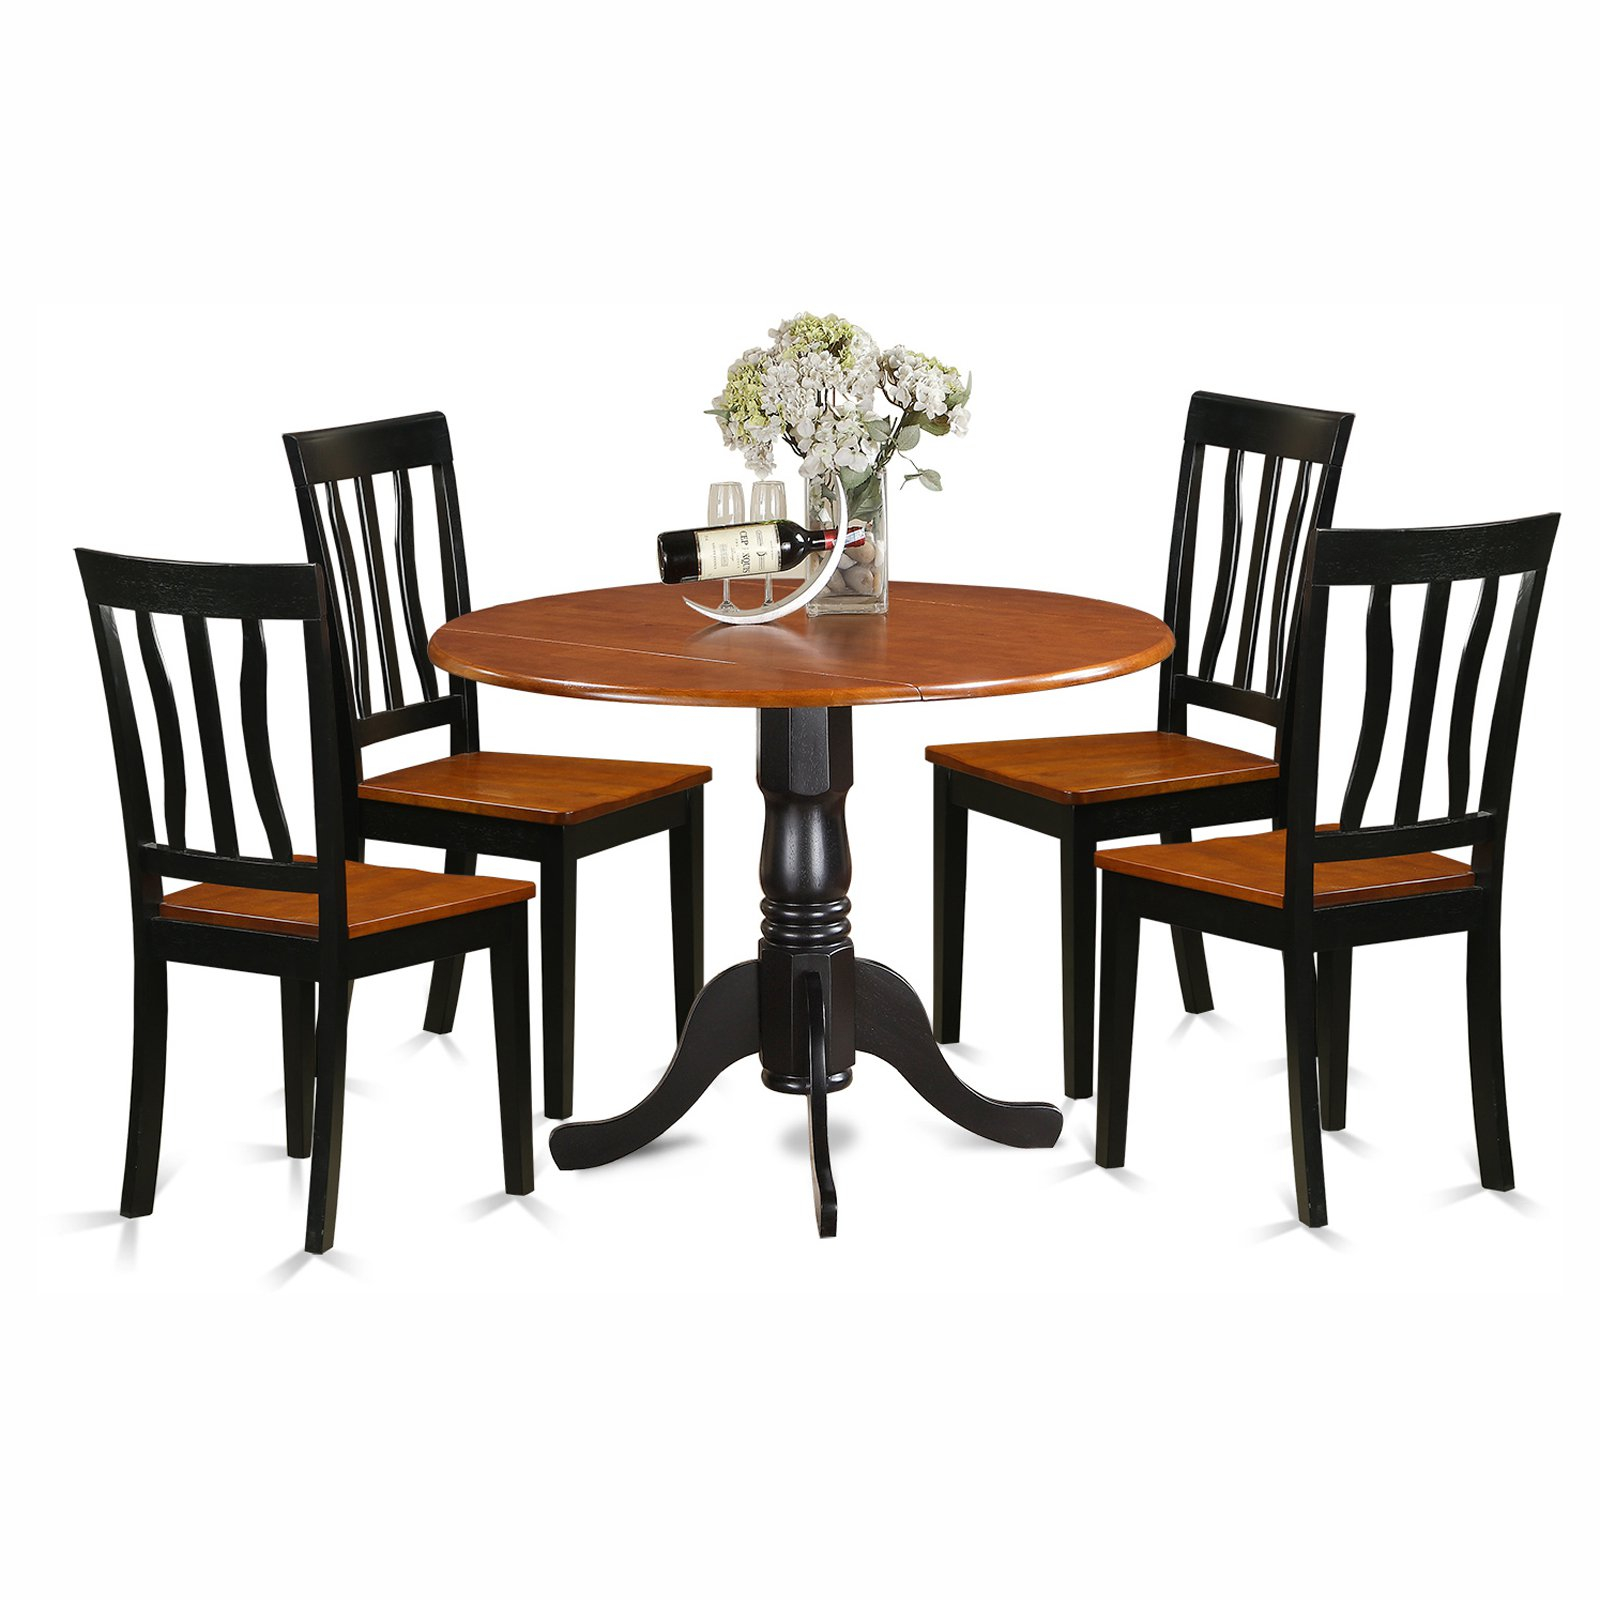 East West Furniture Dublin 5 Piece Drop Leaf Dining Table Set With Wooden Antique Chairs pertaining to sizing 1600 X 1600